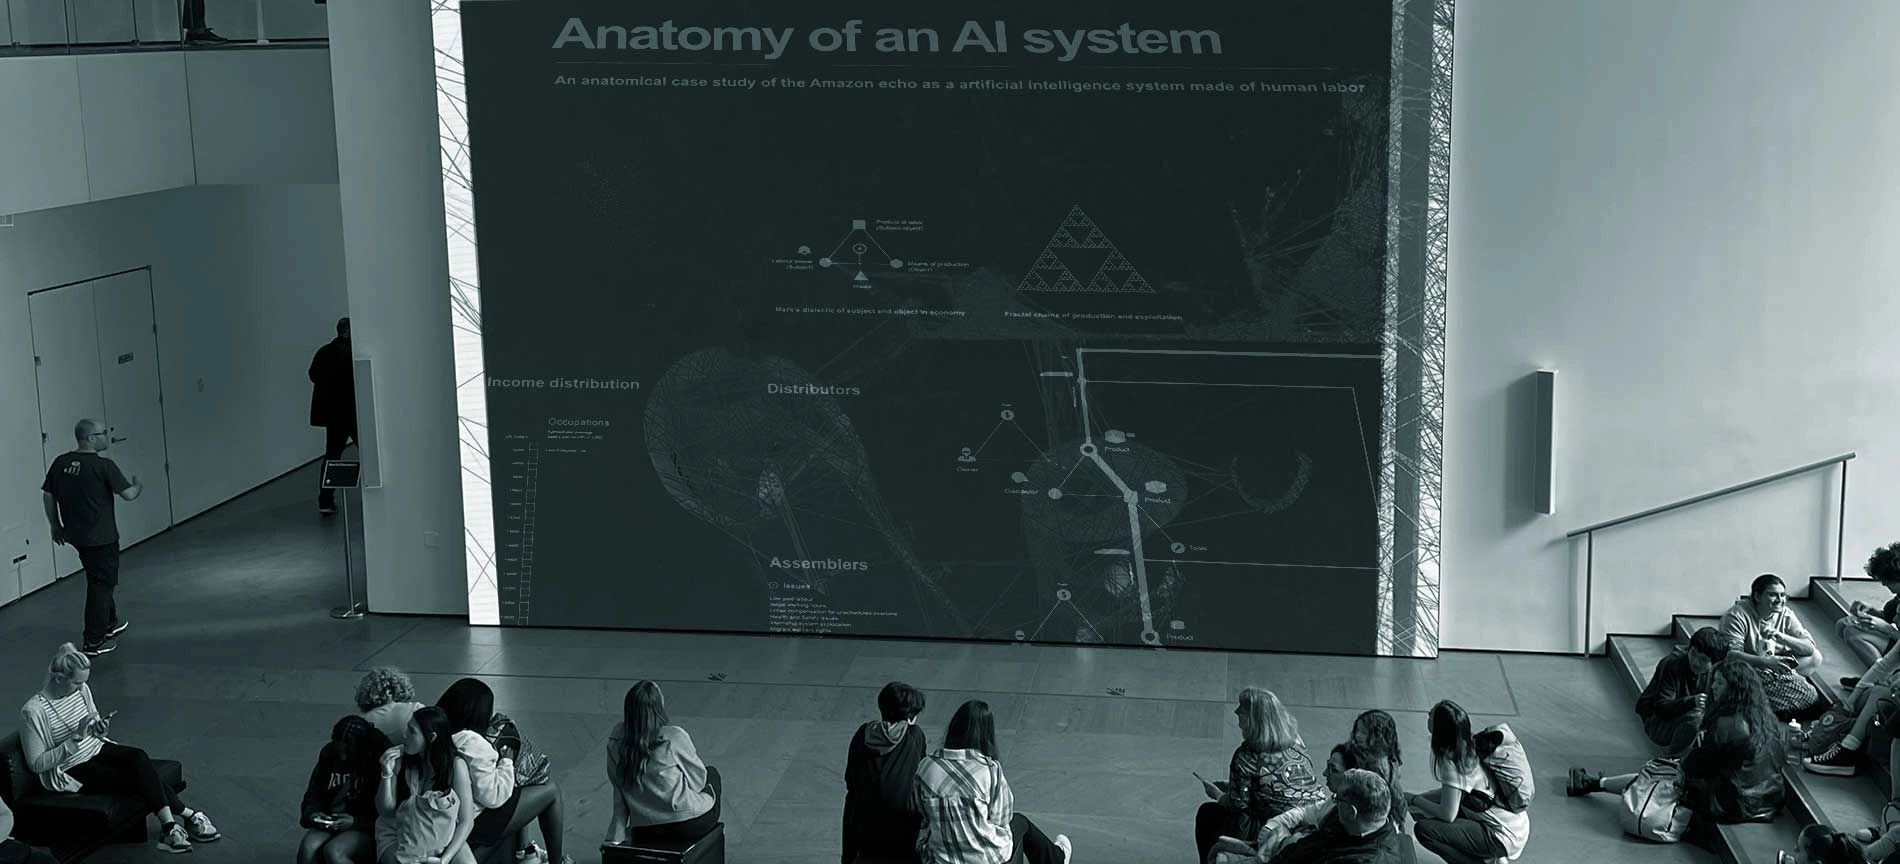 Image of students at a showing of Anatomy of and AI System at a museum.